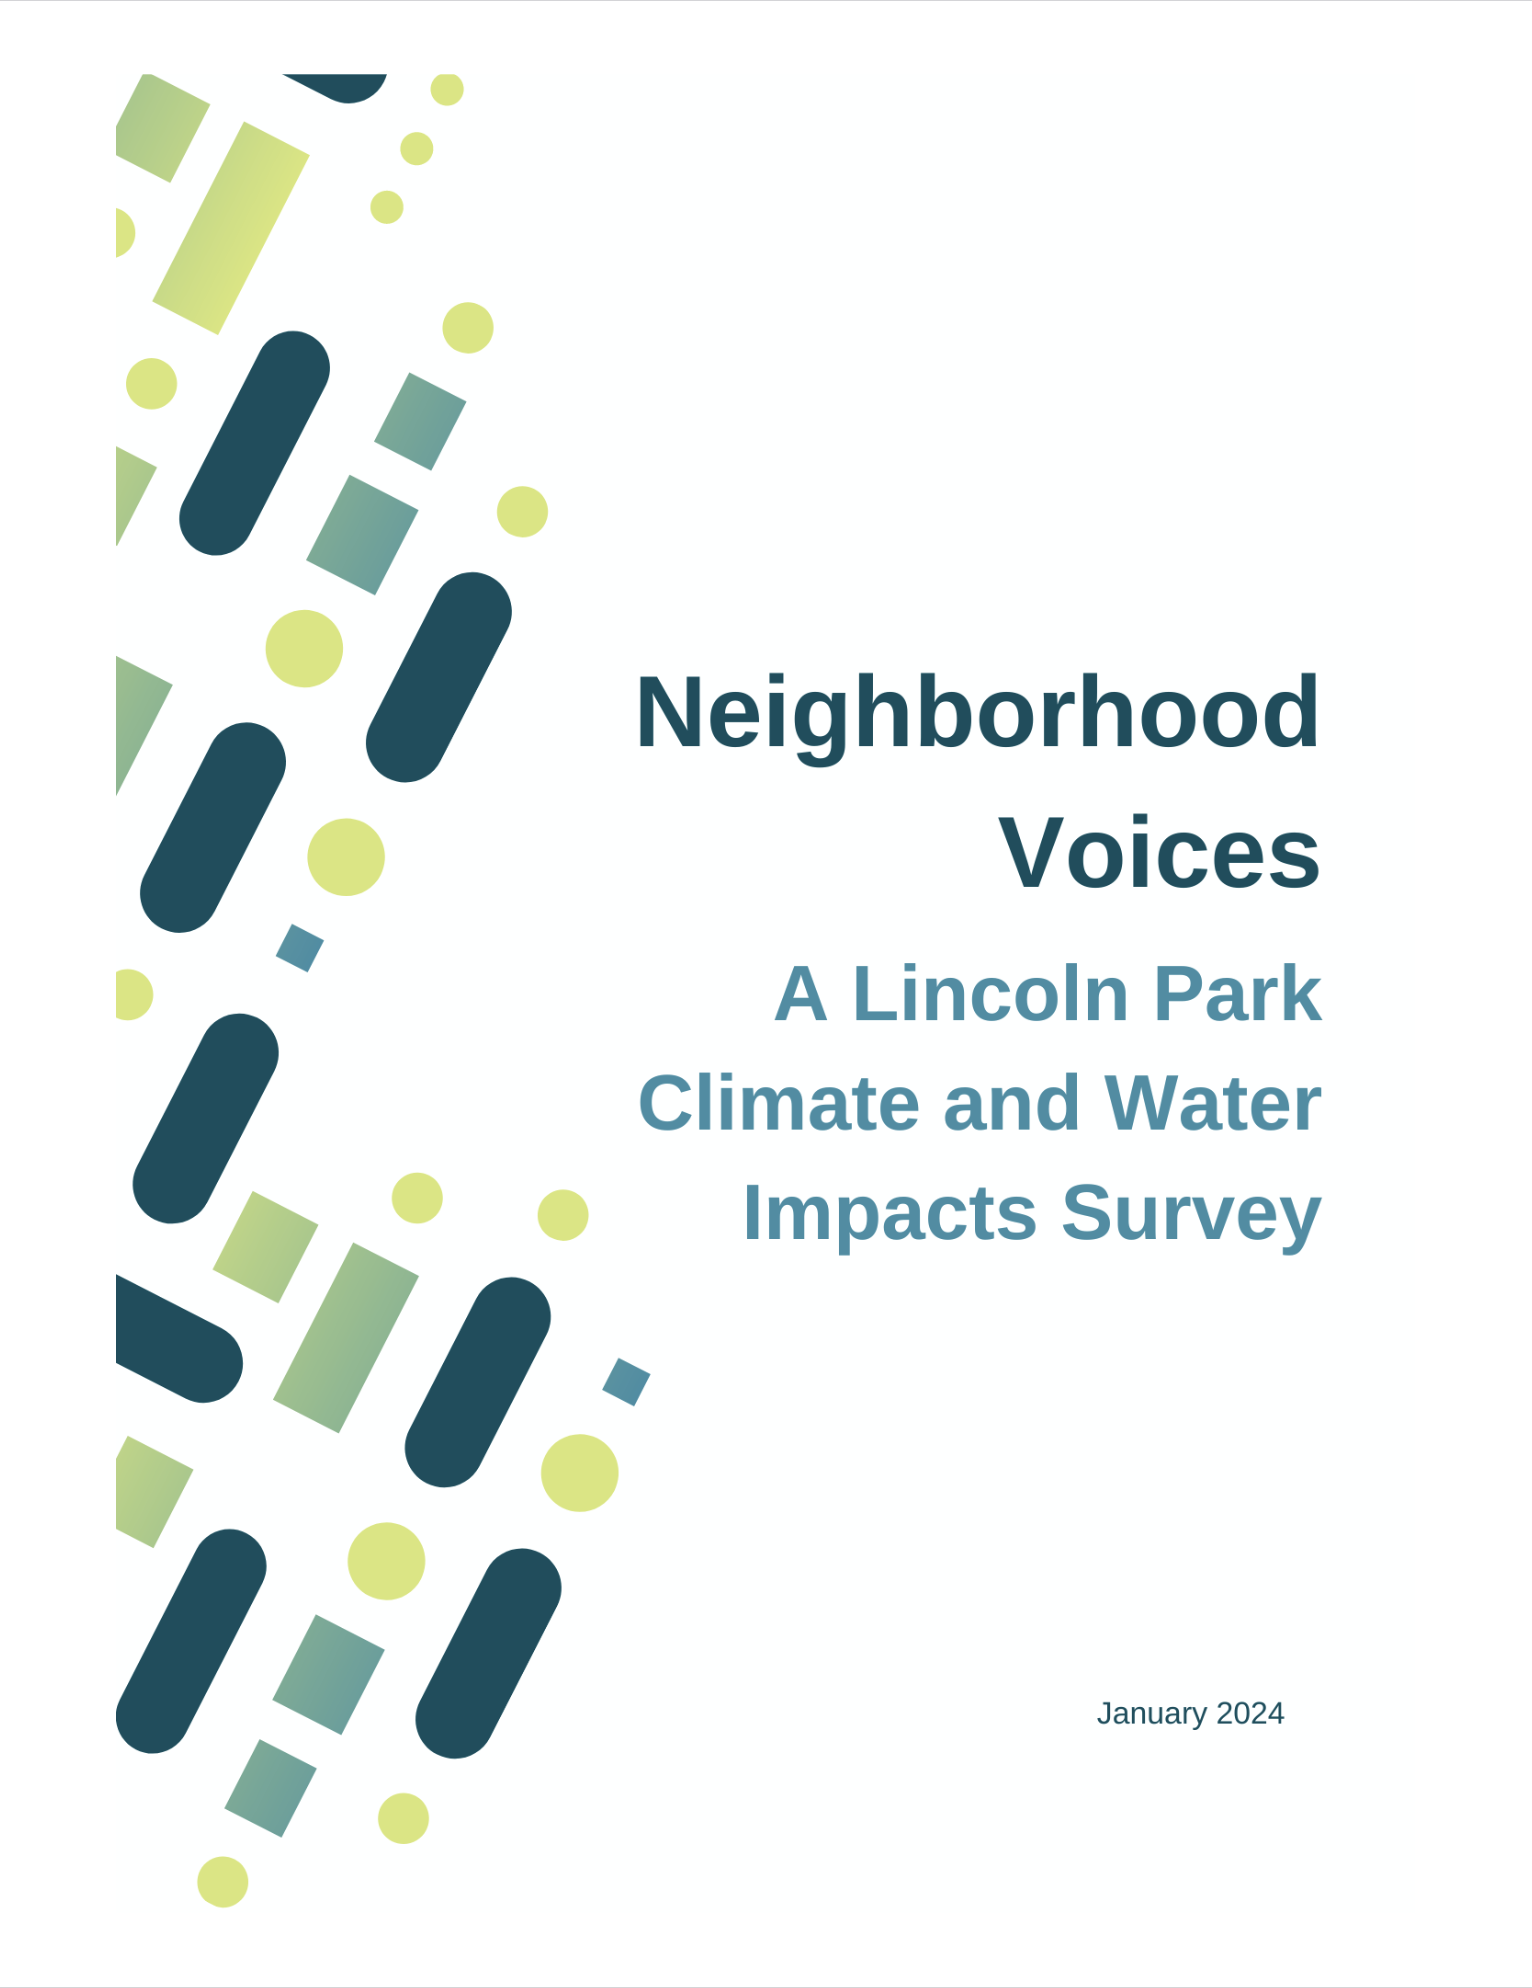 Thumbnail of report cover: "Neighborhood Voices: A Lincoln Park Climate and Water Impacts Survey"